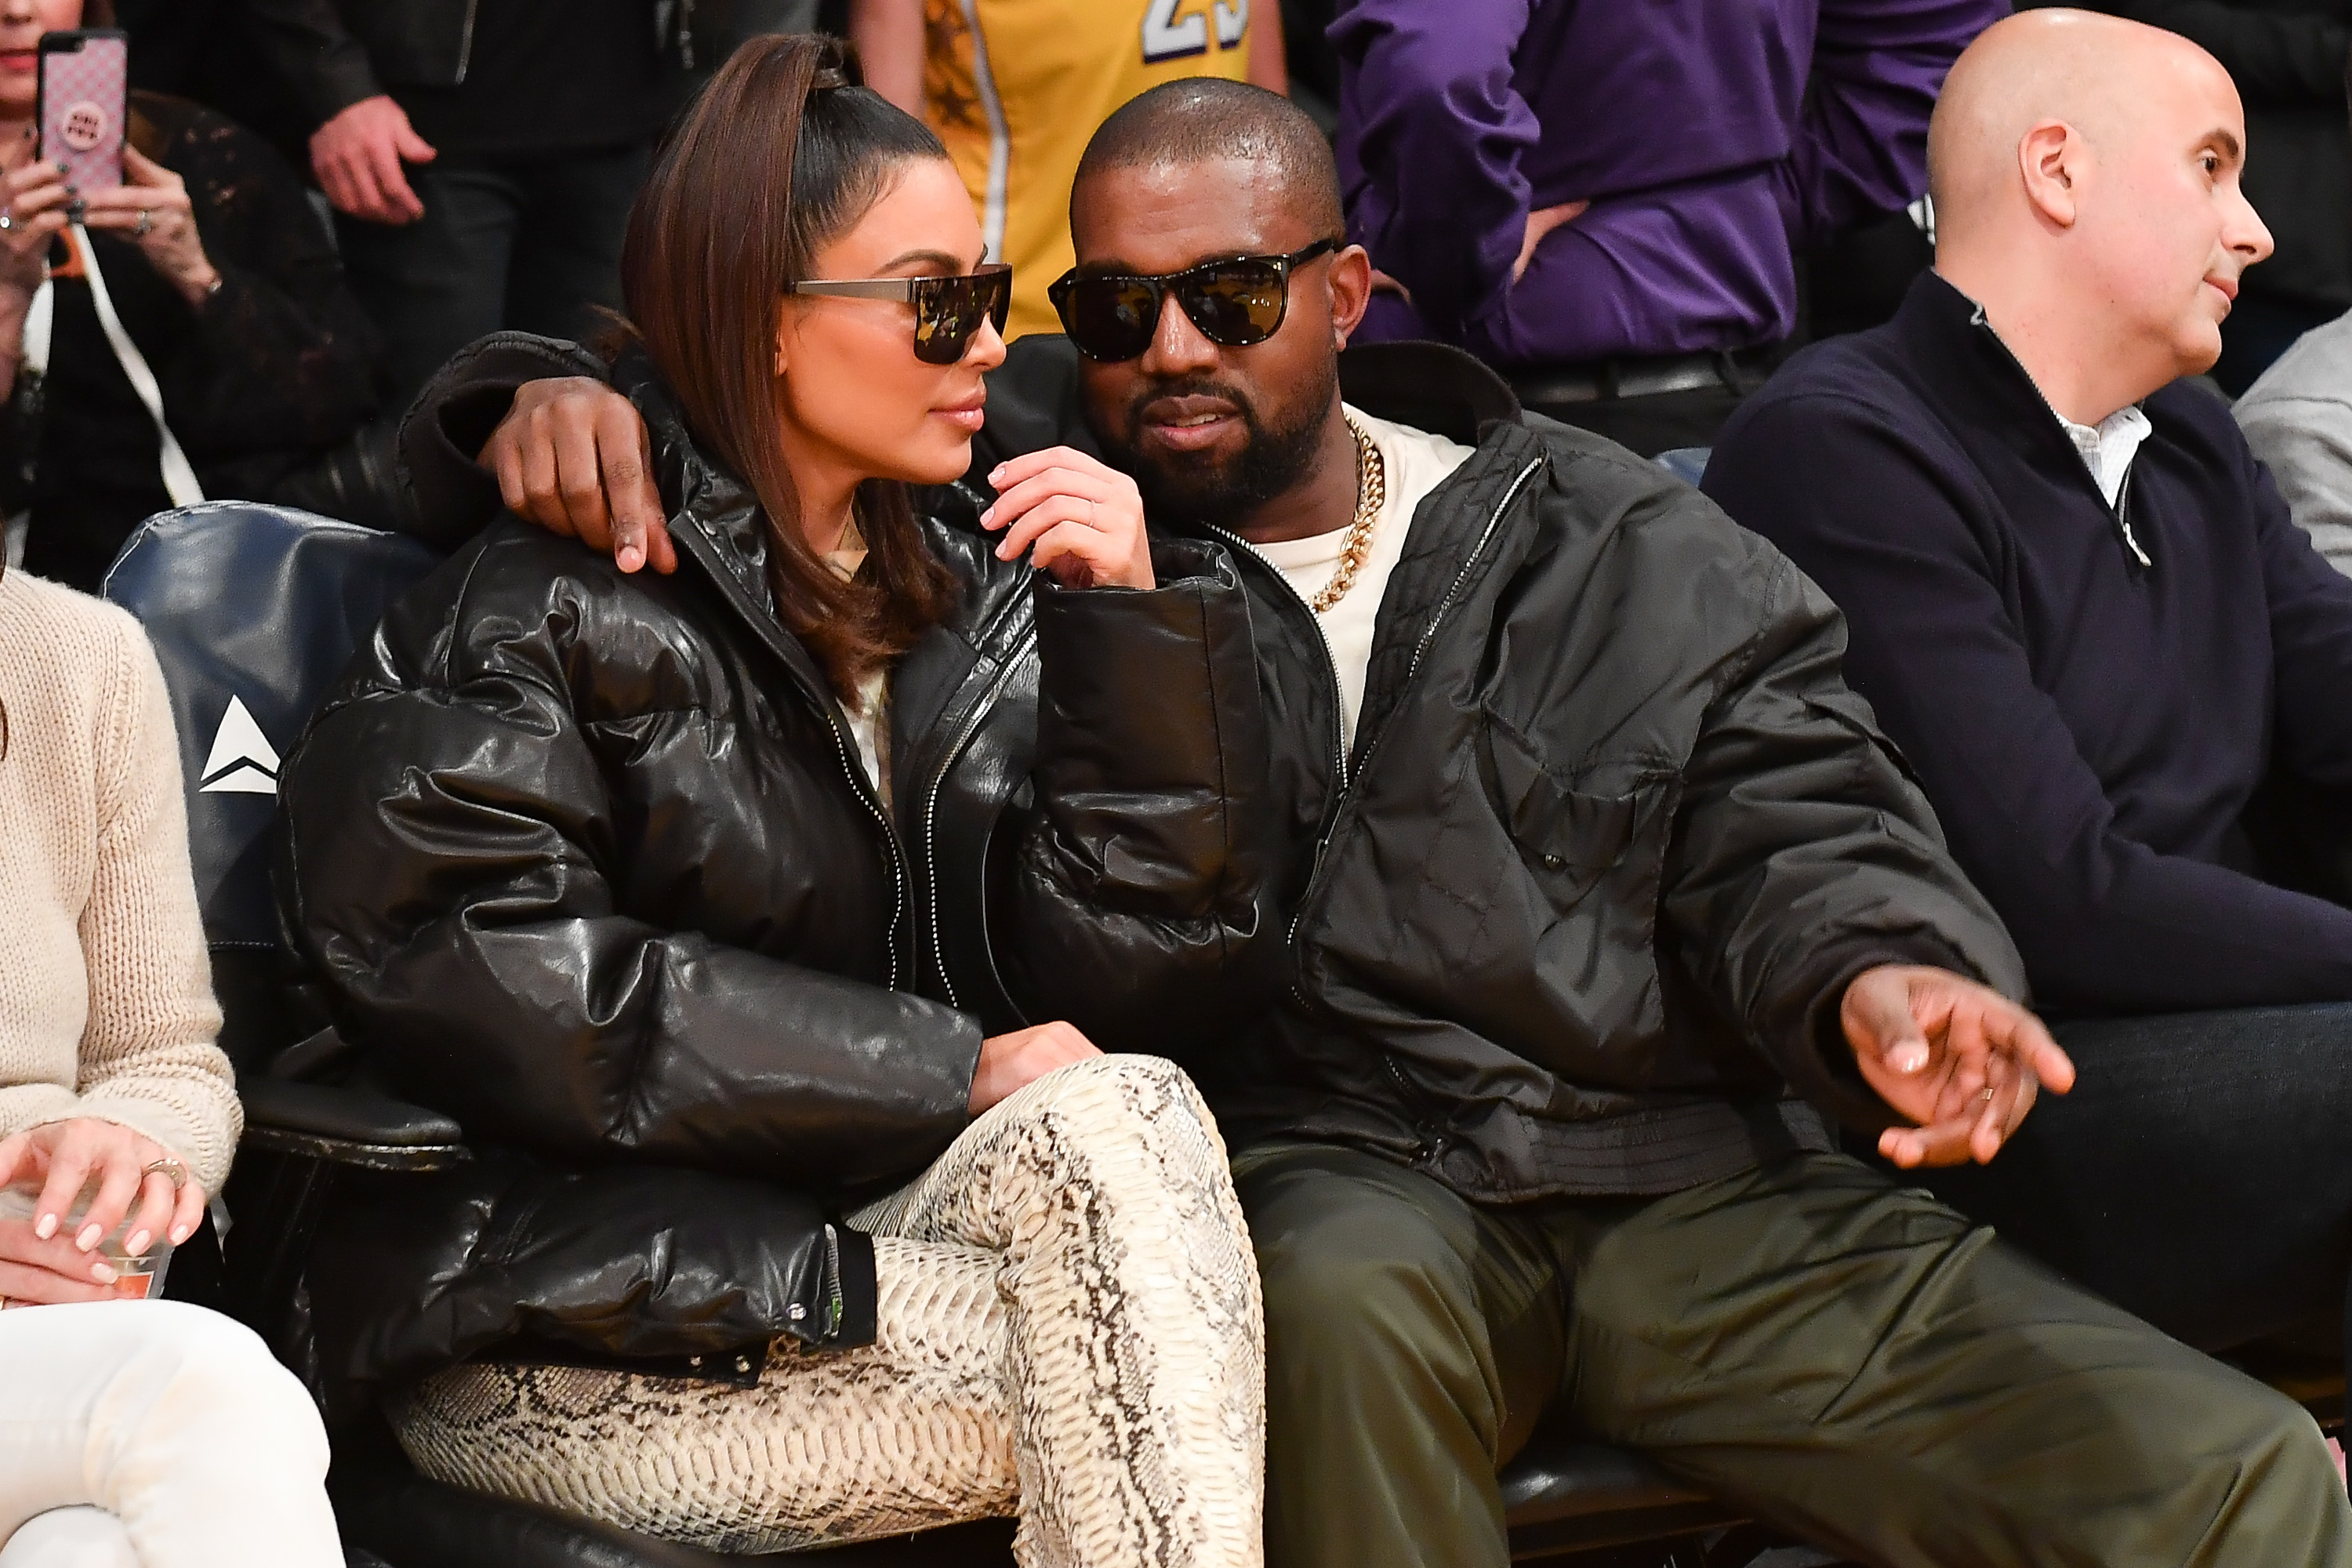 Kim and Ye in the crowd at a sports event